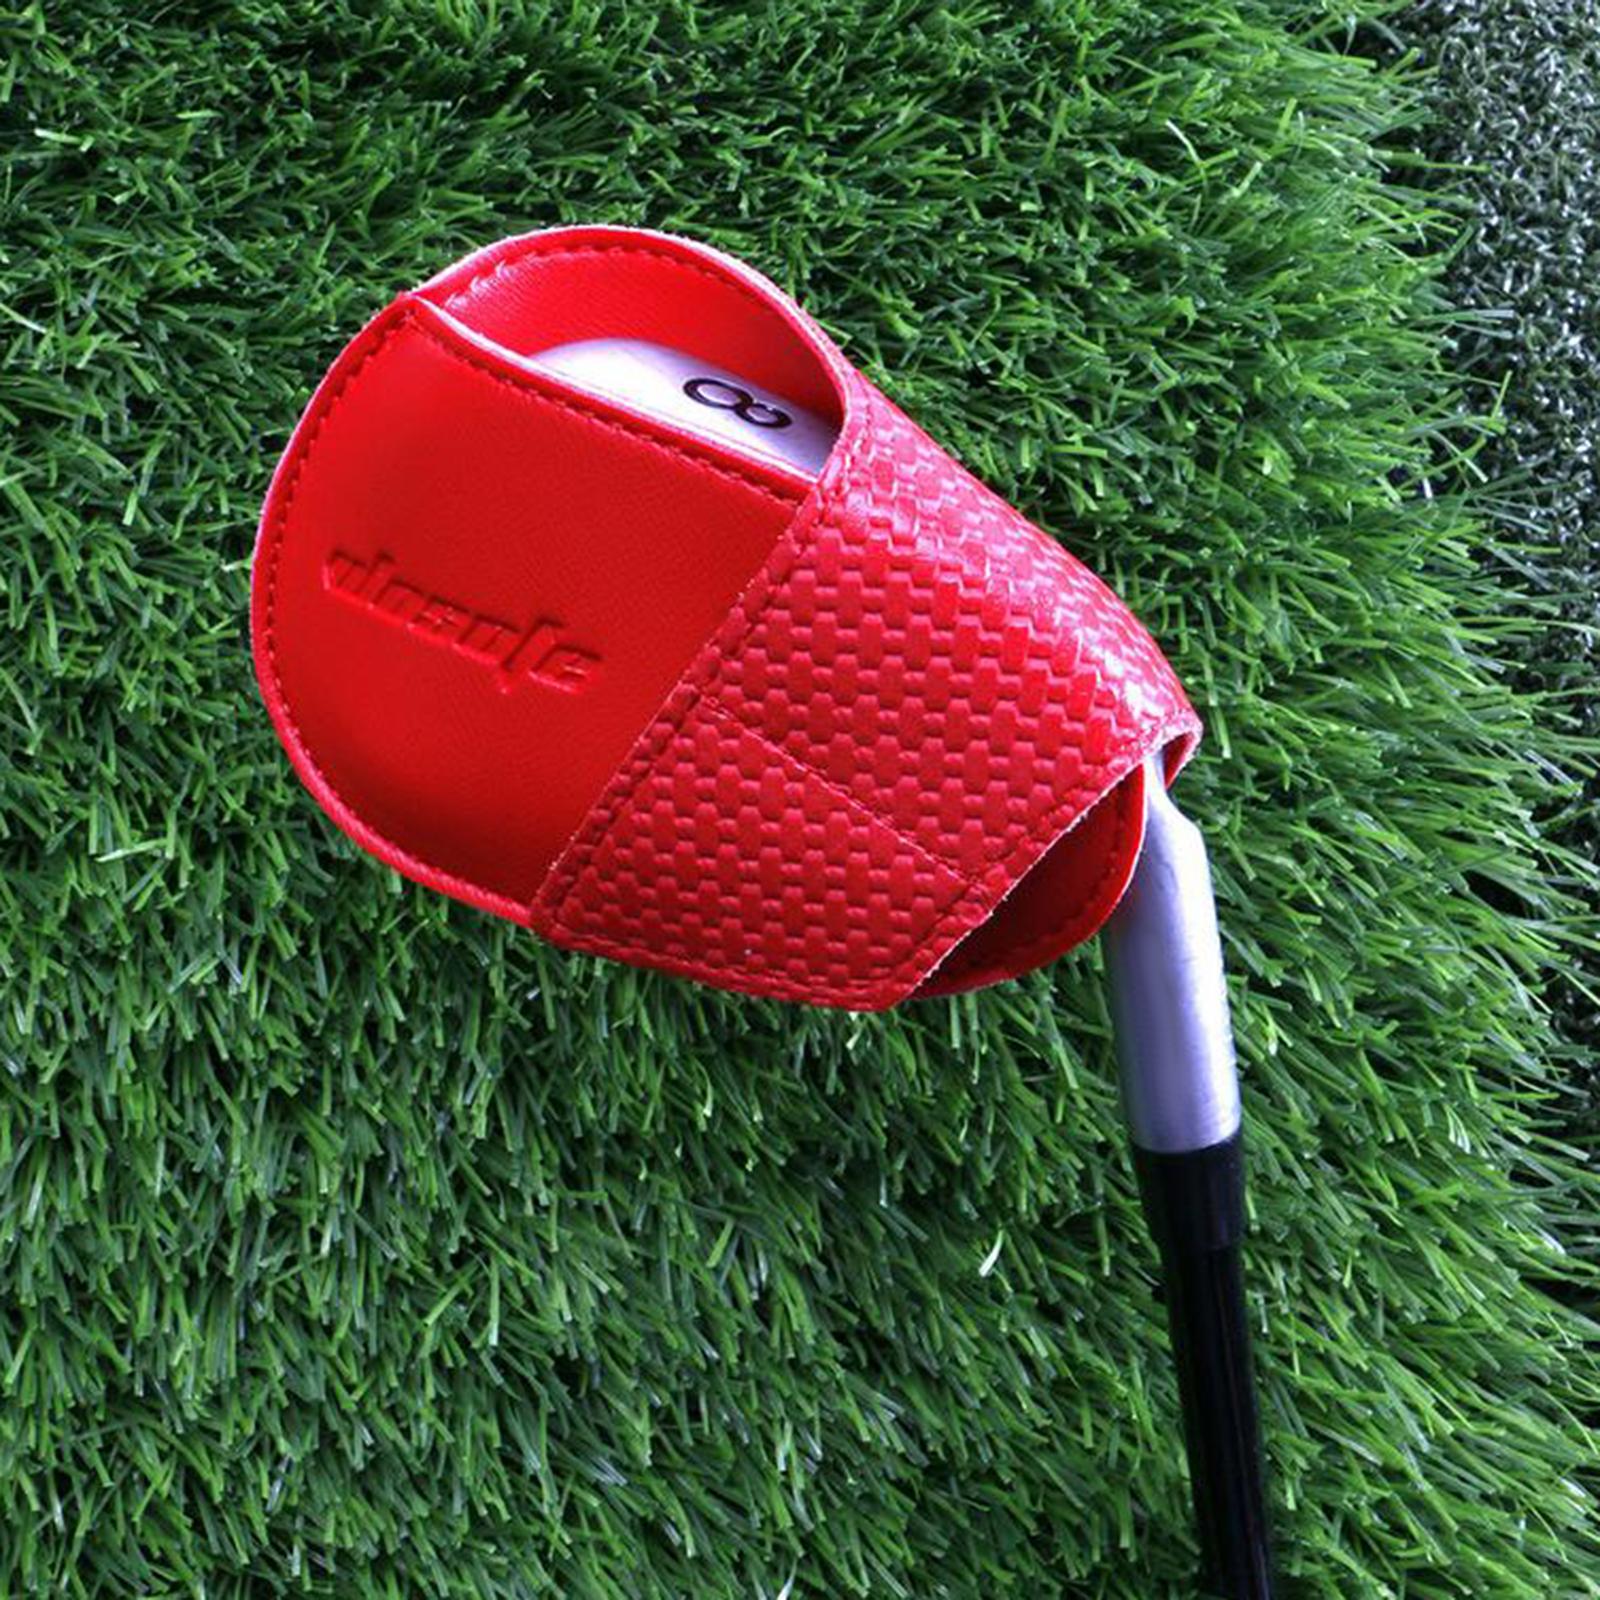 Golf Head Covers PU Portable Protector for Athlete Travel Golf Training Red Small